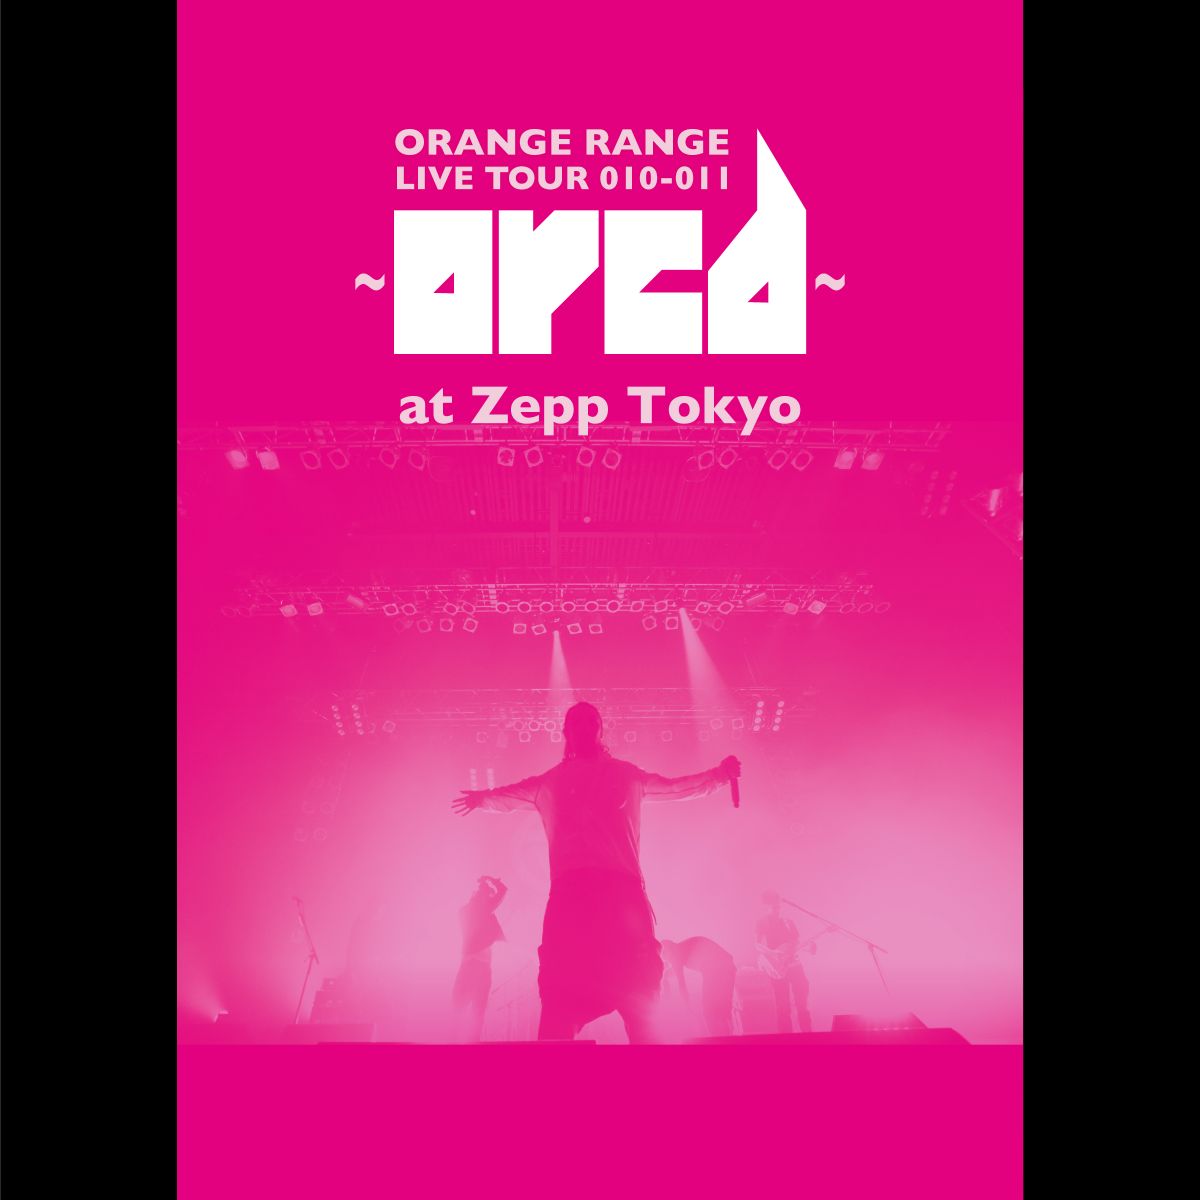 LIVE TOUR 010-011 〜orcd〜 at Zepp Tokyo【ライブアルバム】